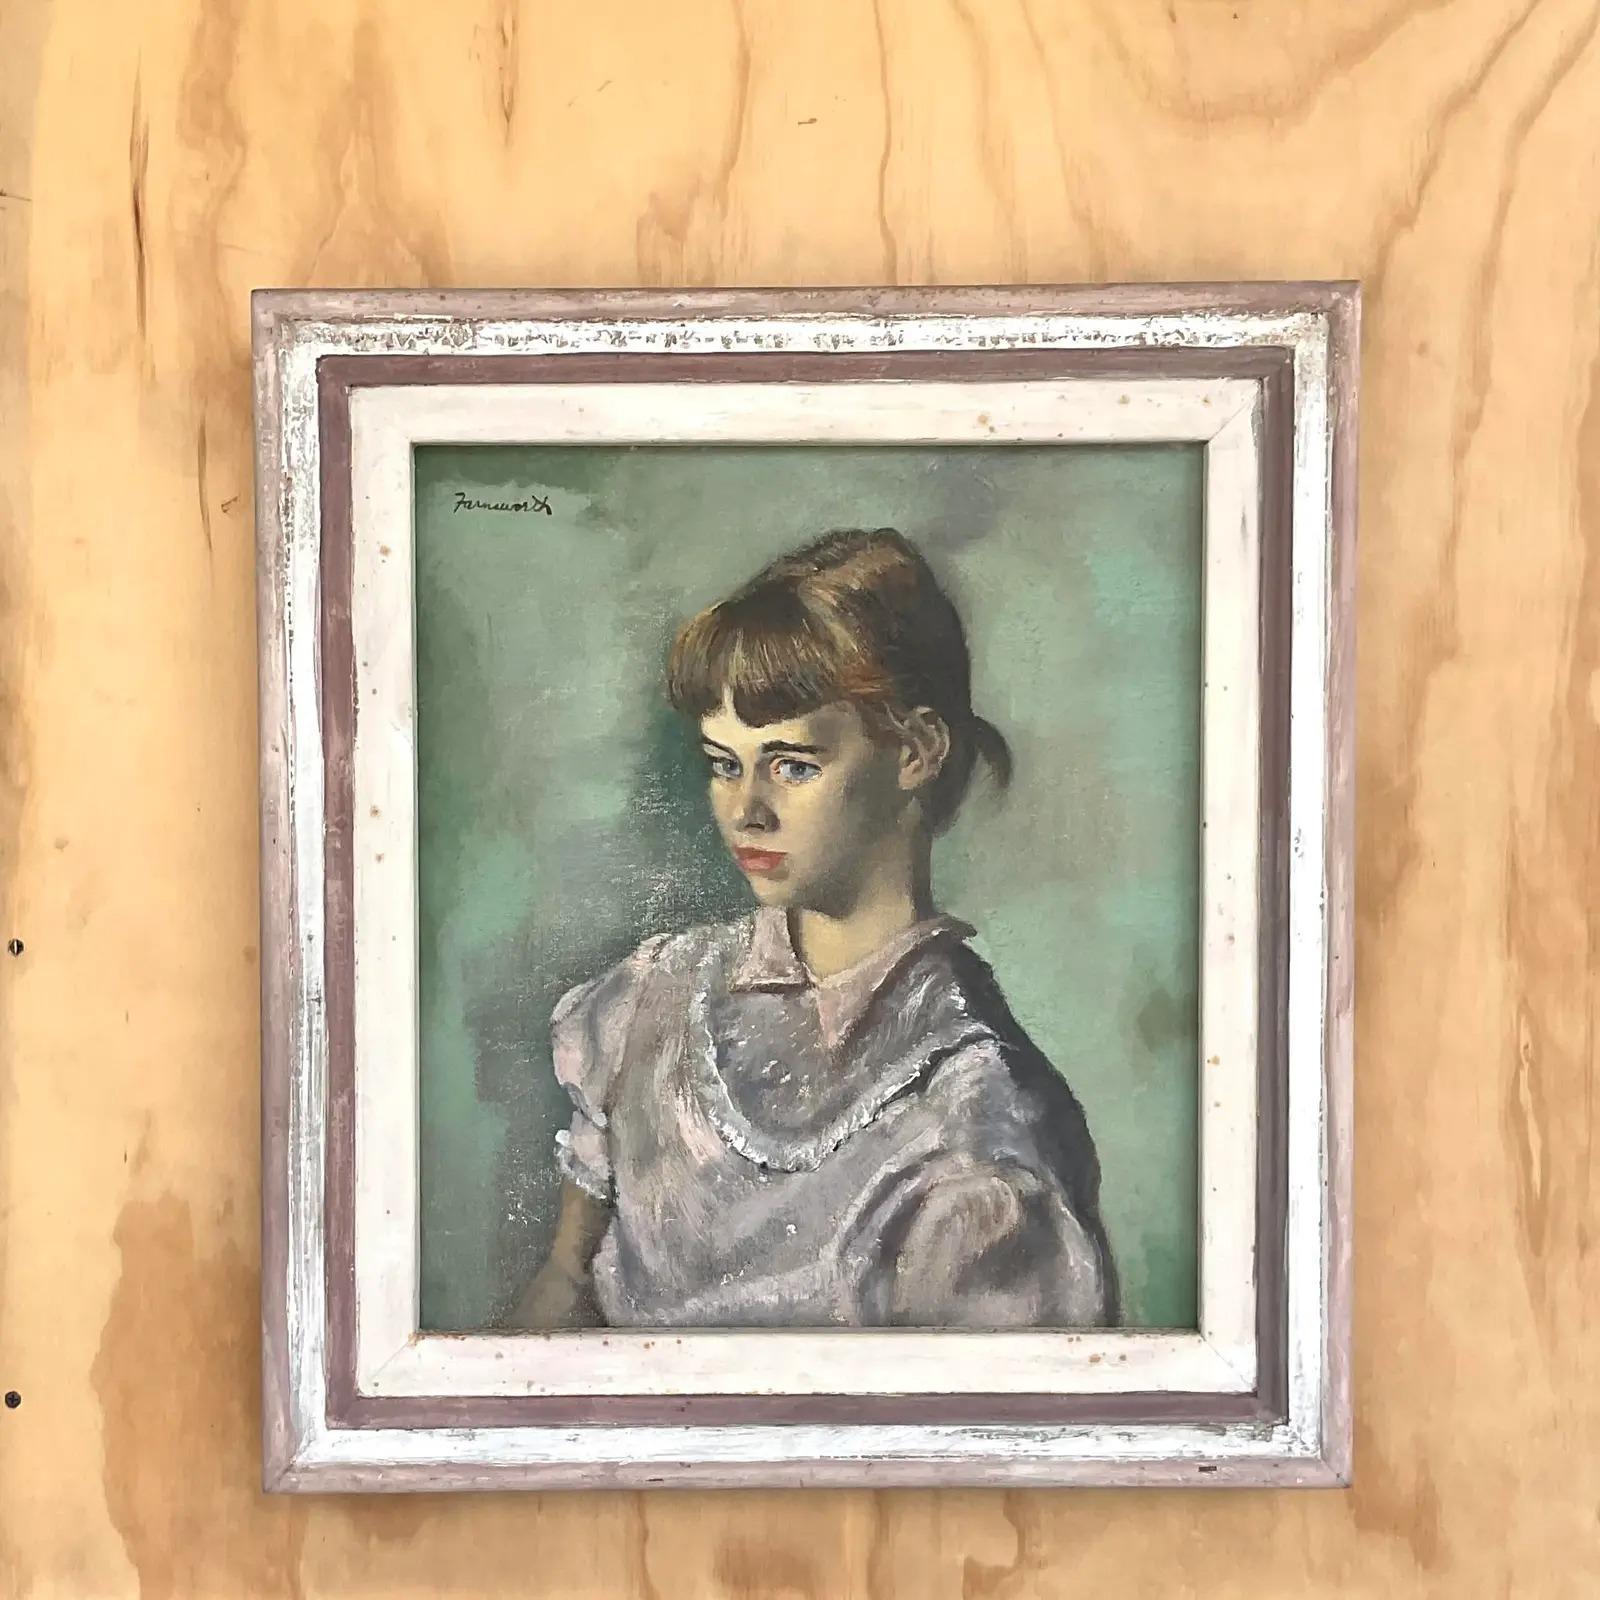 Gorgeous vintage original oil portrait. A beautiful composition of a young girl. Signed by the artist Farnsworth. Acquired from a Florida estate.